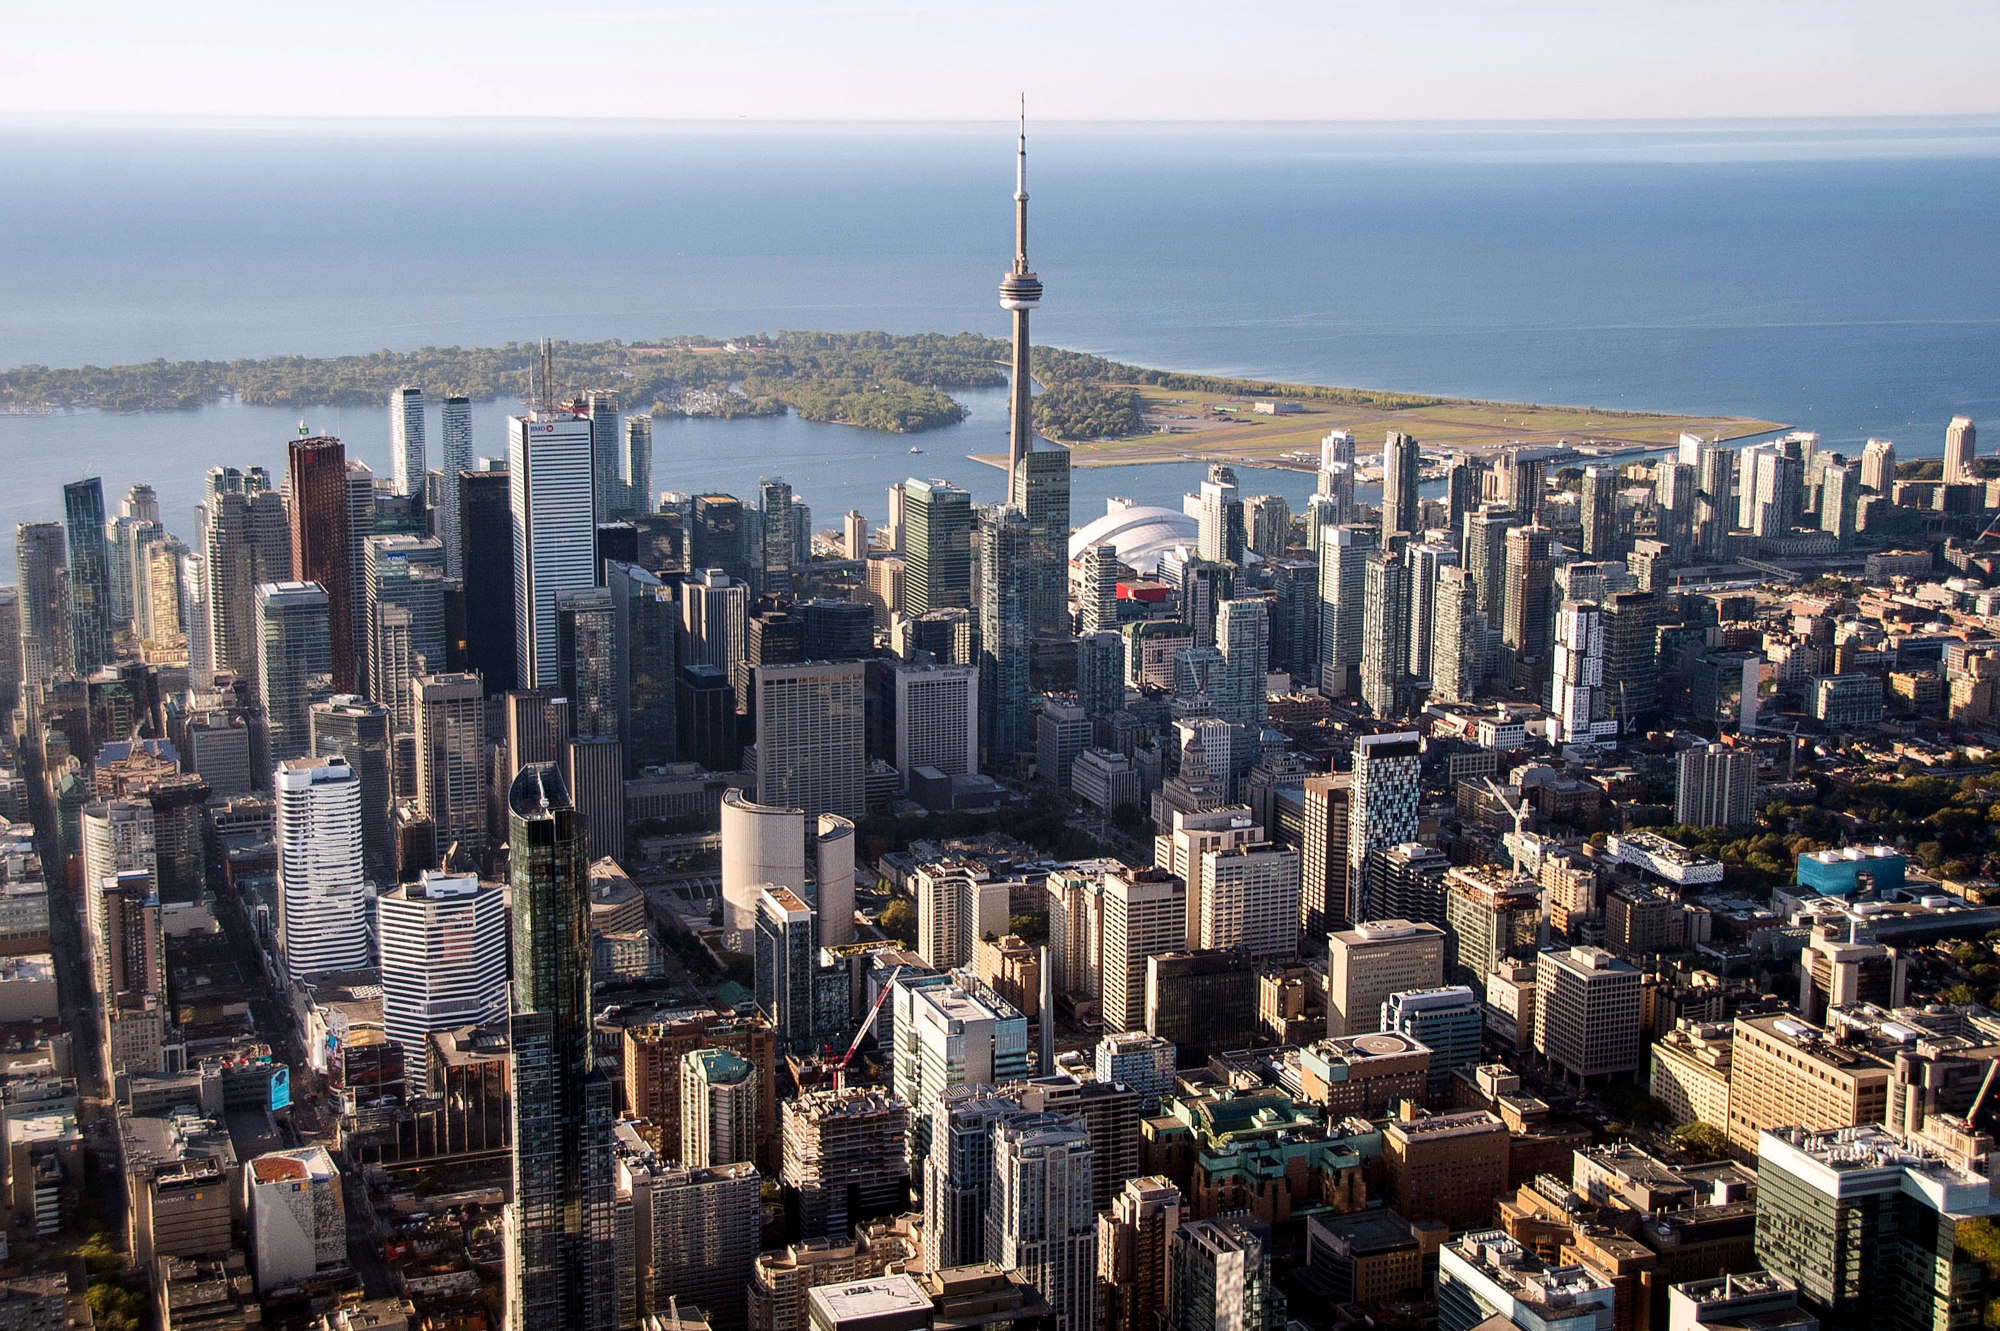 The CN Tower stands among buildings in the downtown skyline in this aerial photograph taken above Toronto, Ontario, Canada, on Monday, Oct. 2, 2017.